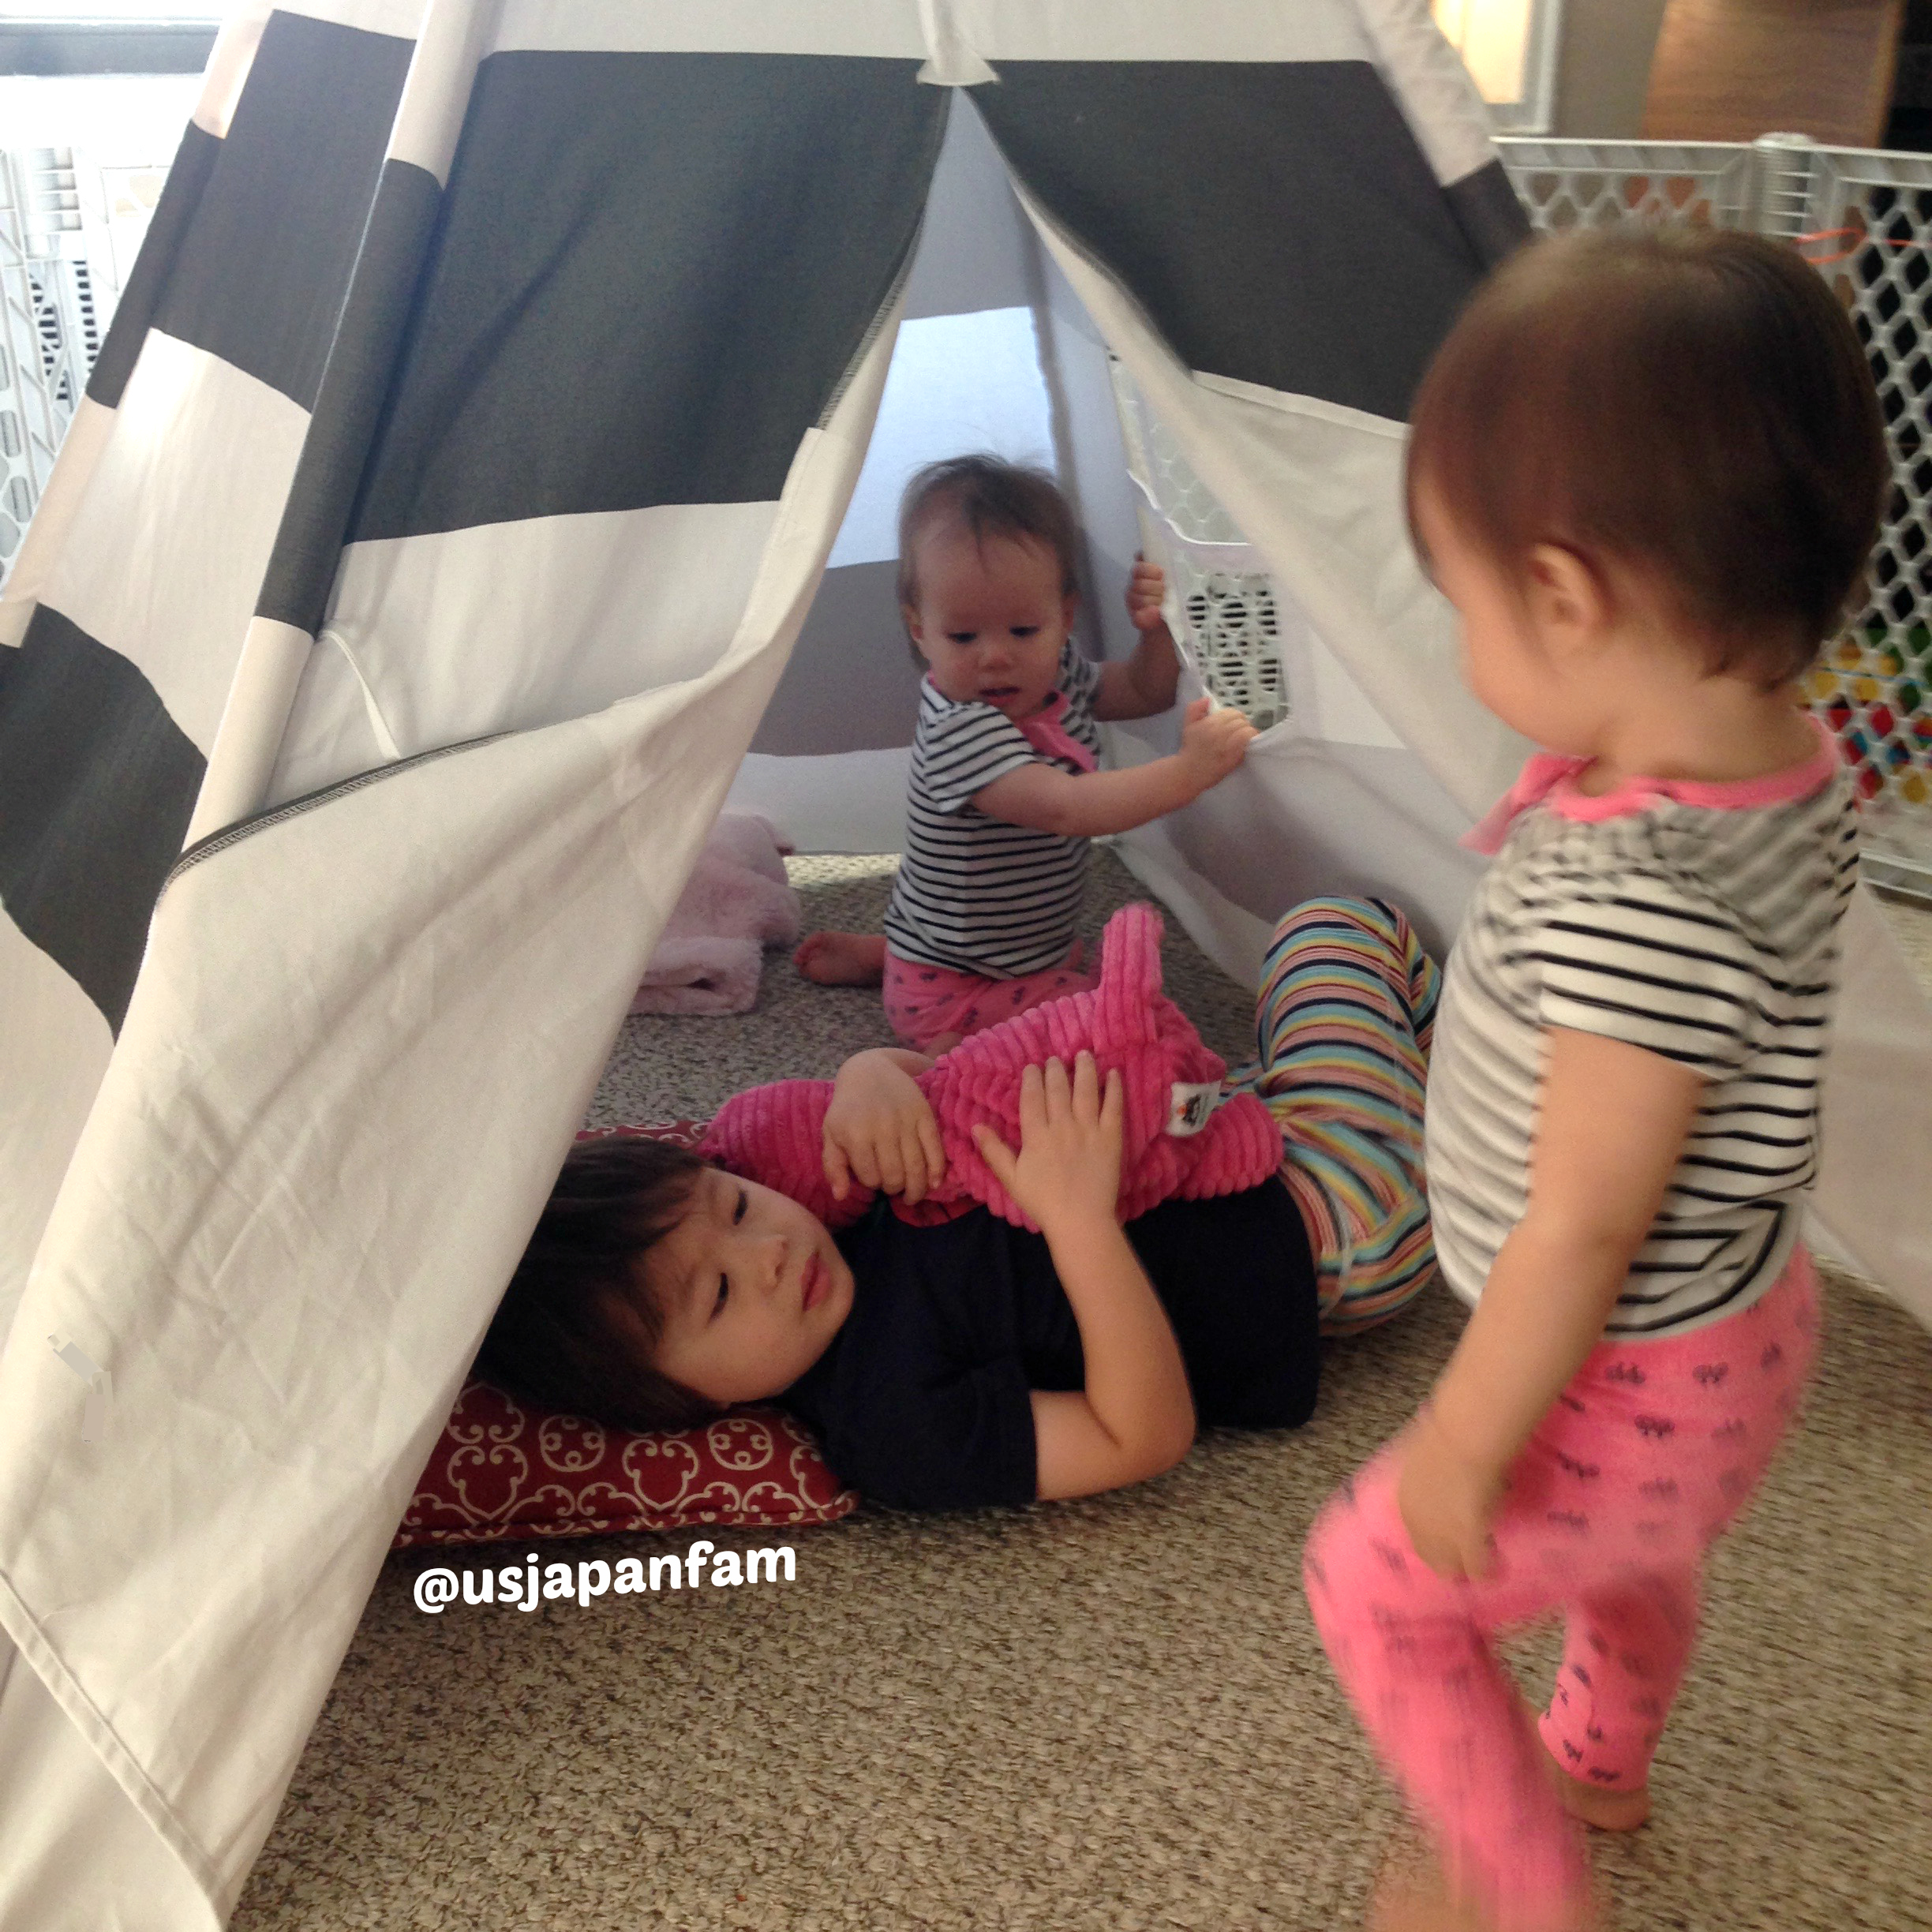 US Japan Fam reviews and loves Tiny Hideaways Teepee Tent - great for all ages and uses!